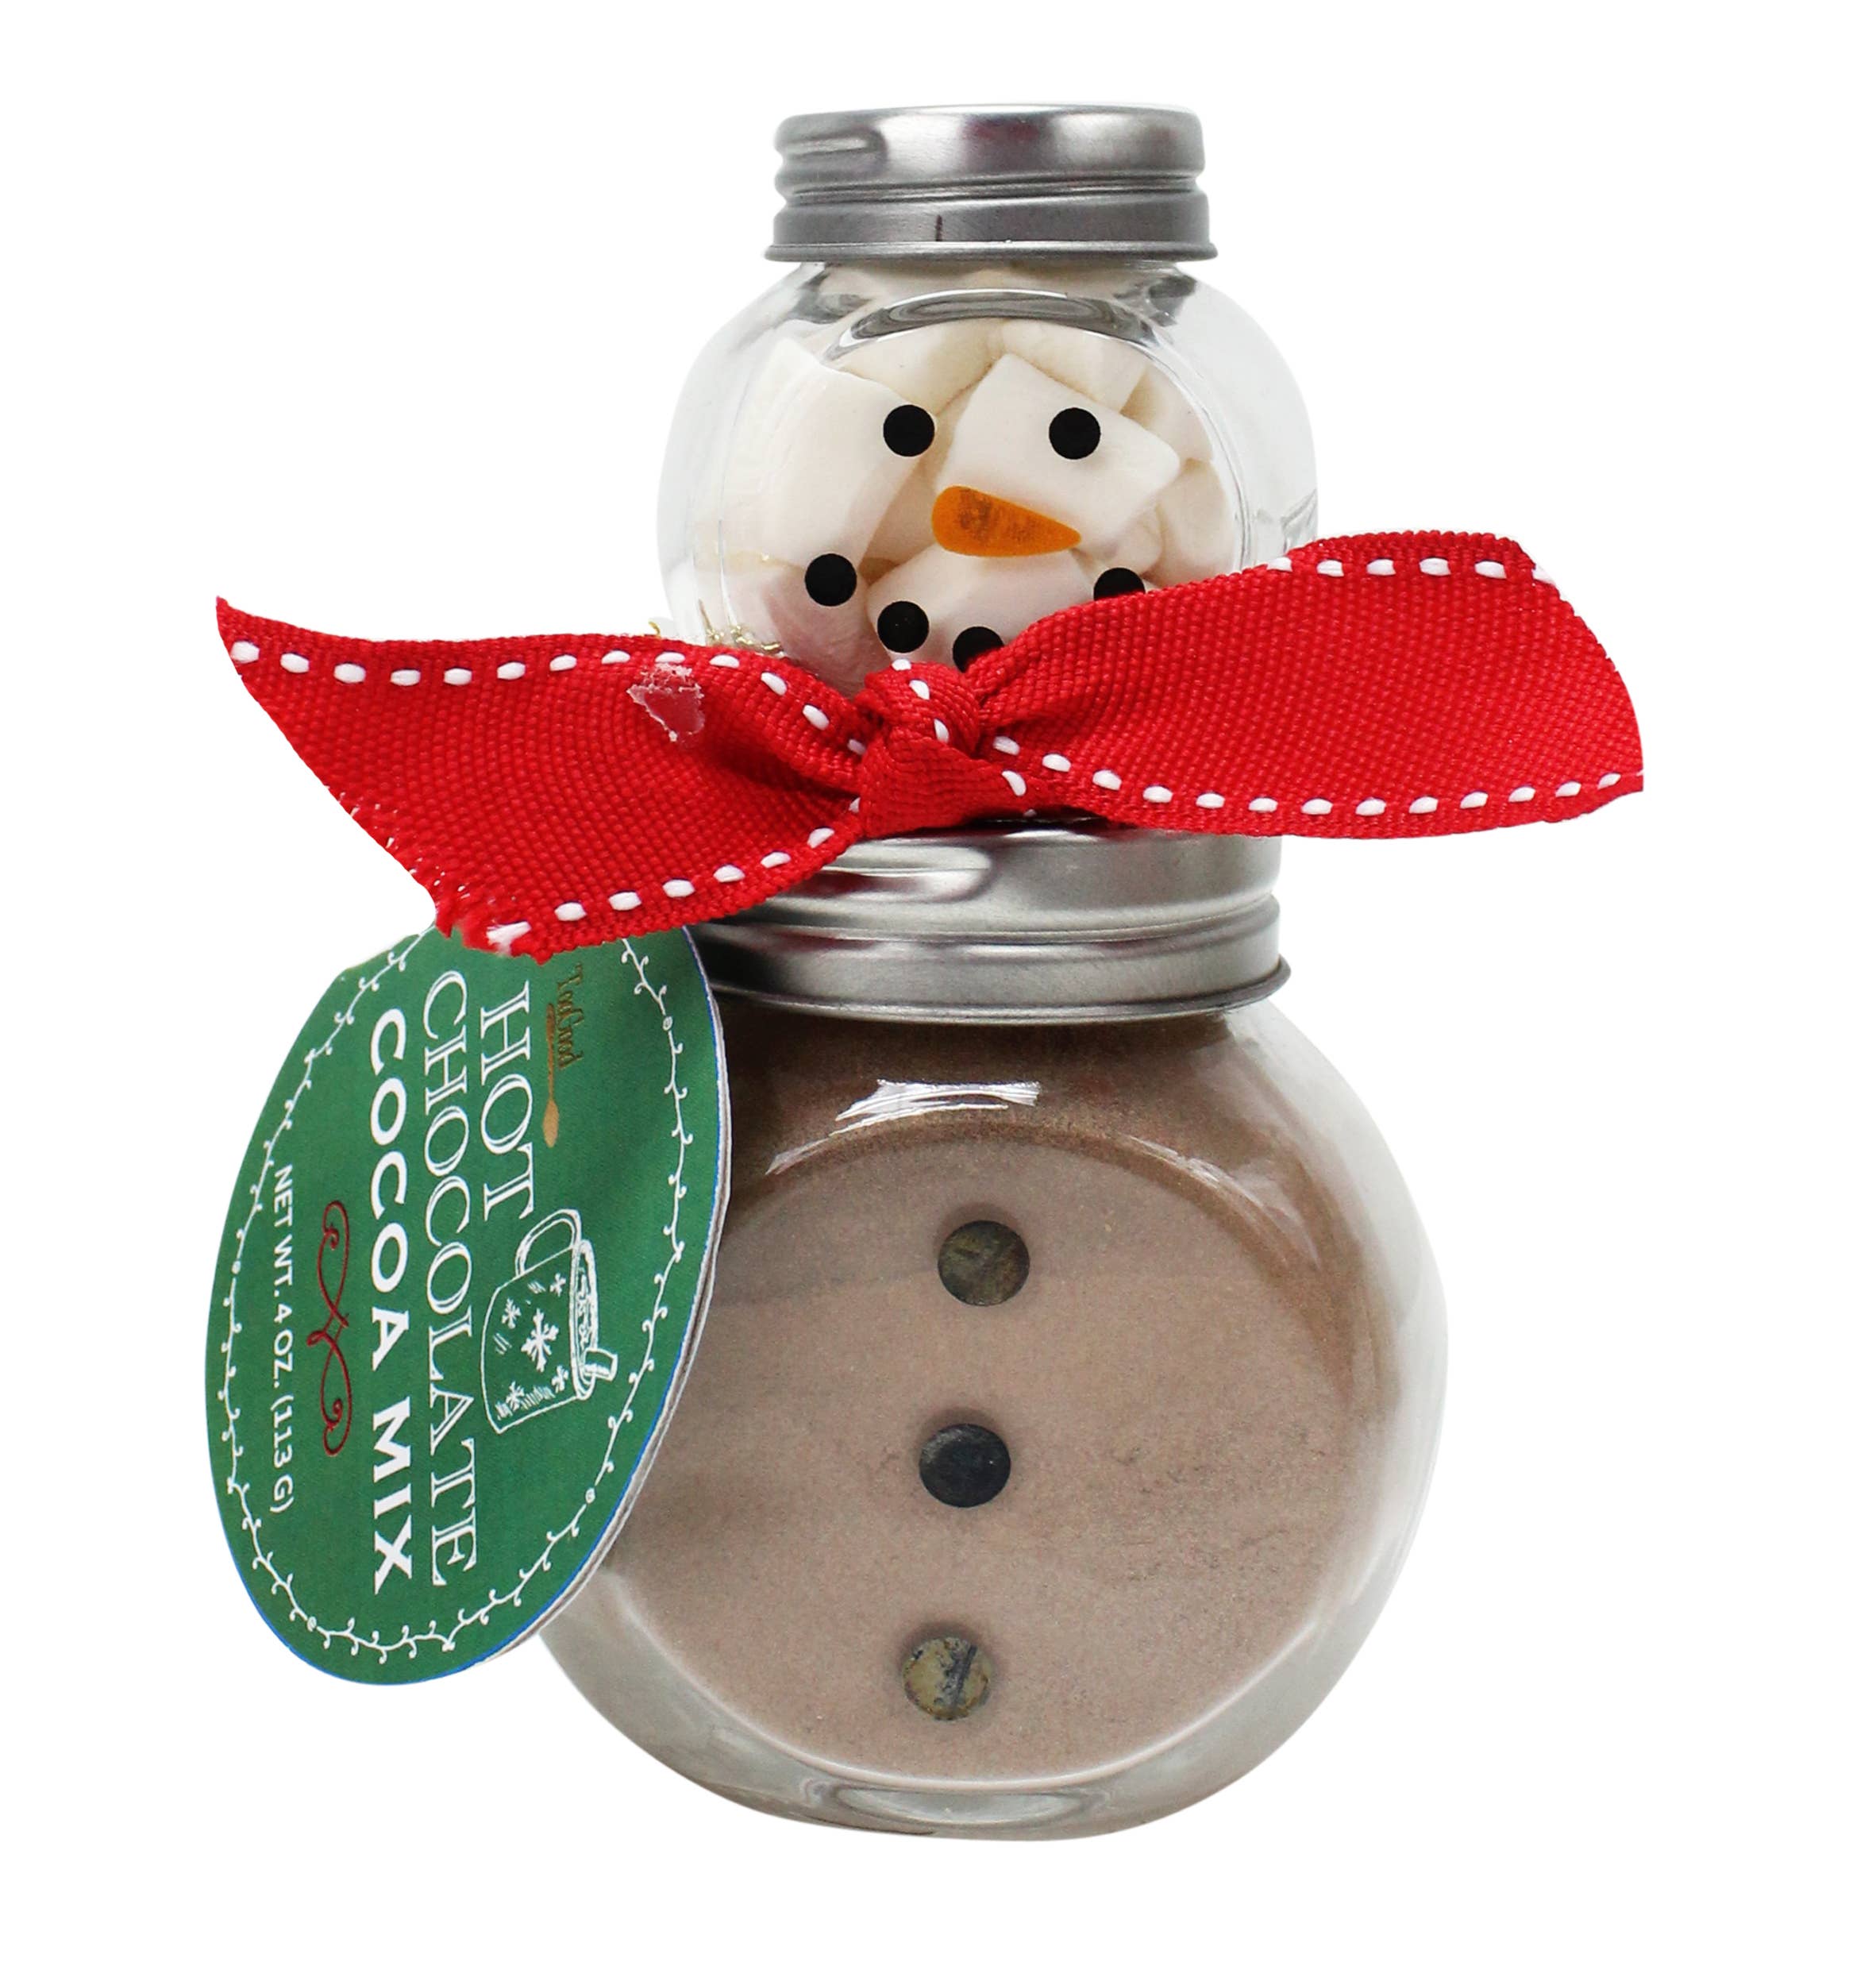 2 Stack Glass Jar - Snowman Cocoa Set: Assorted